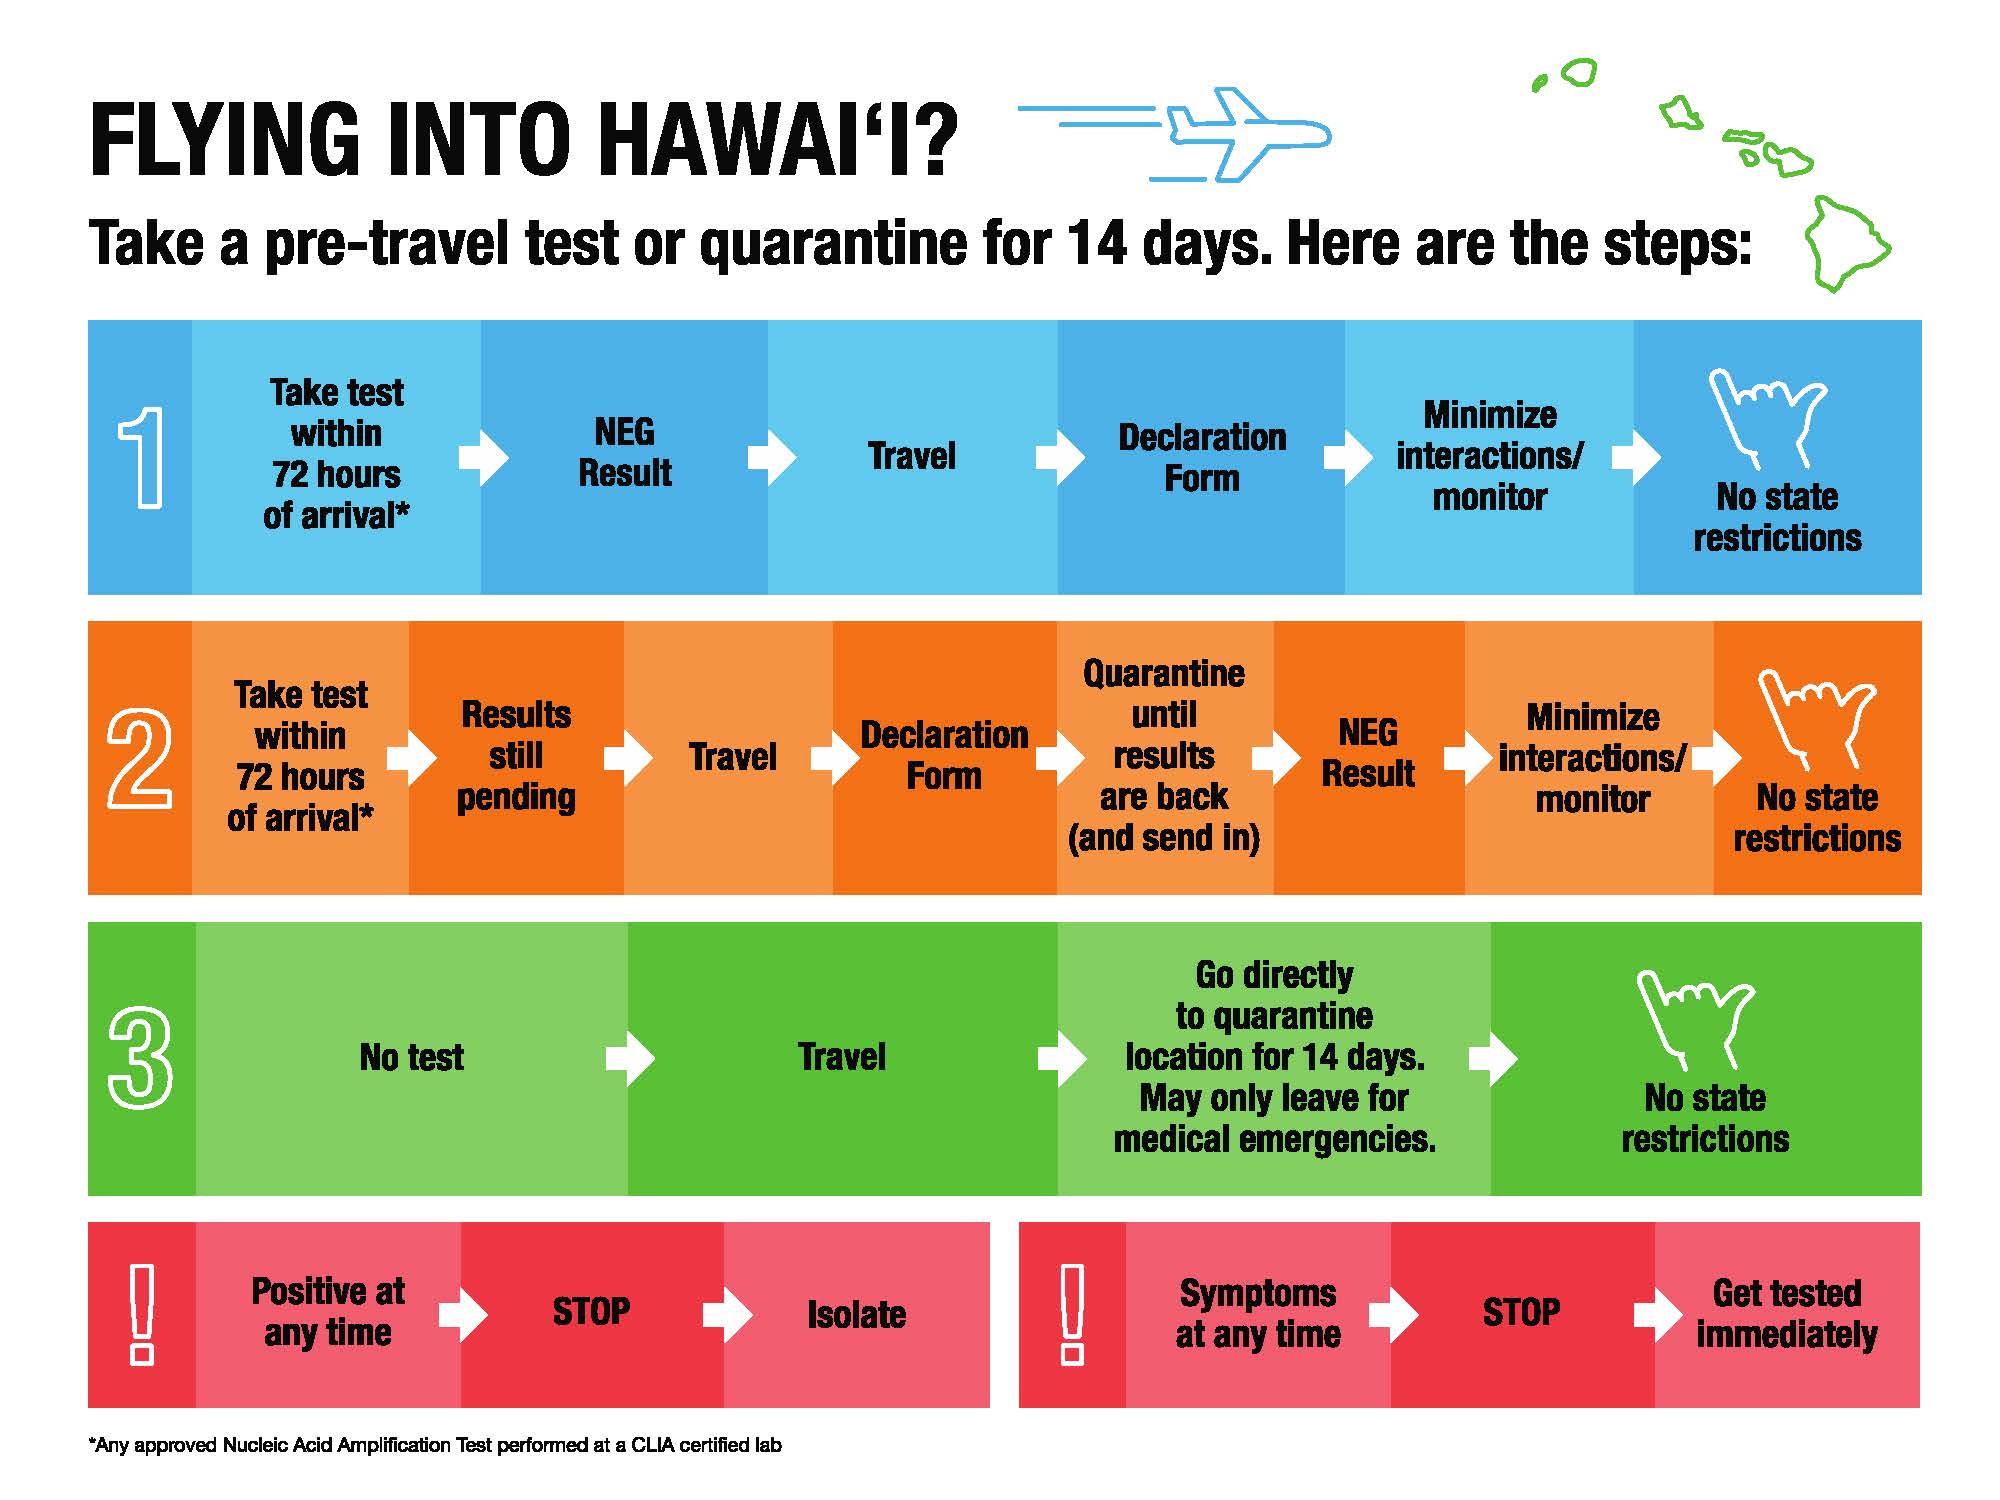 Hawaii Re-Open Date to Travelers